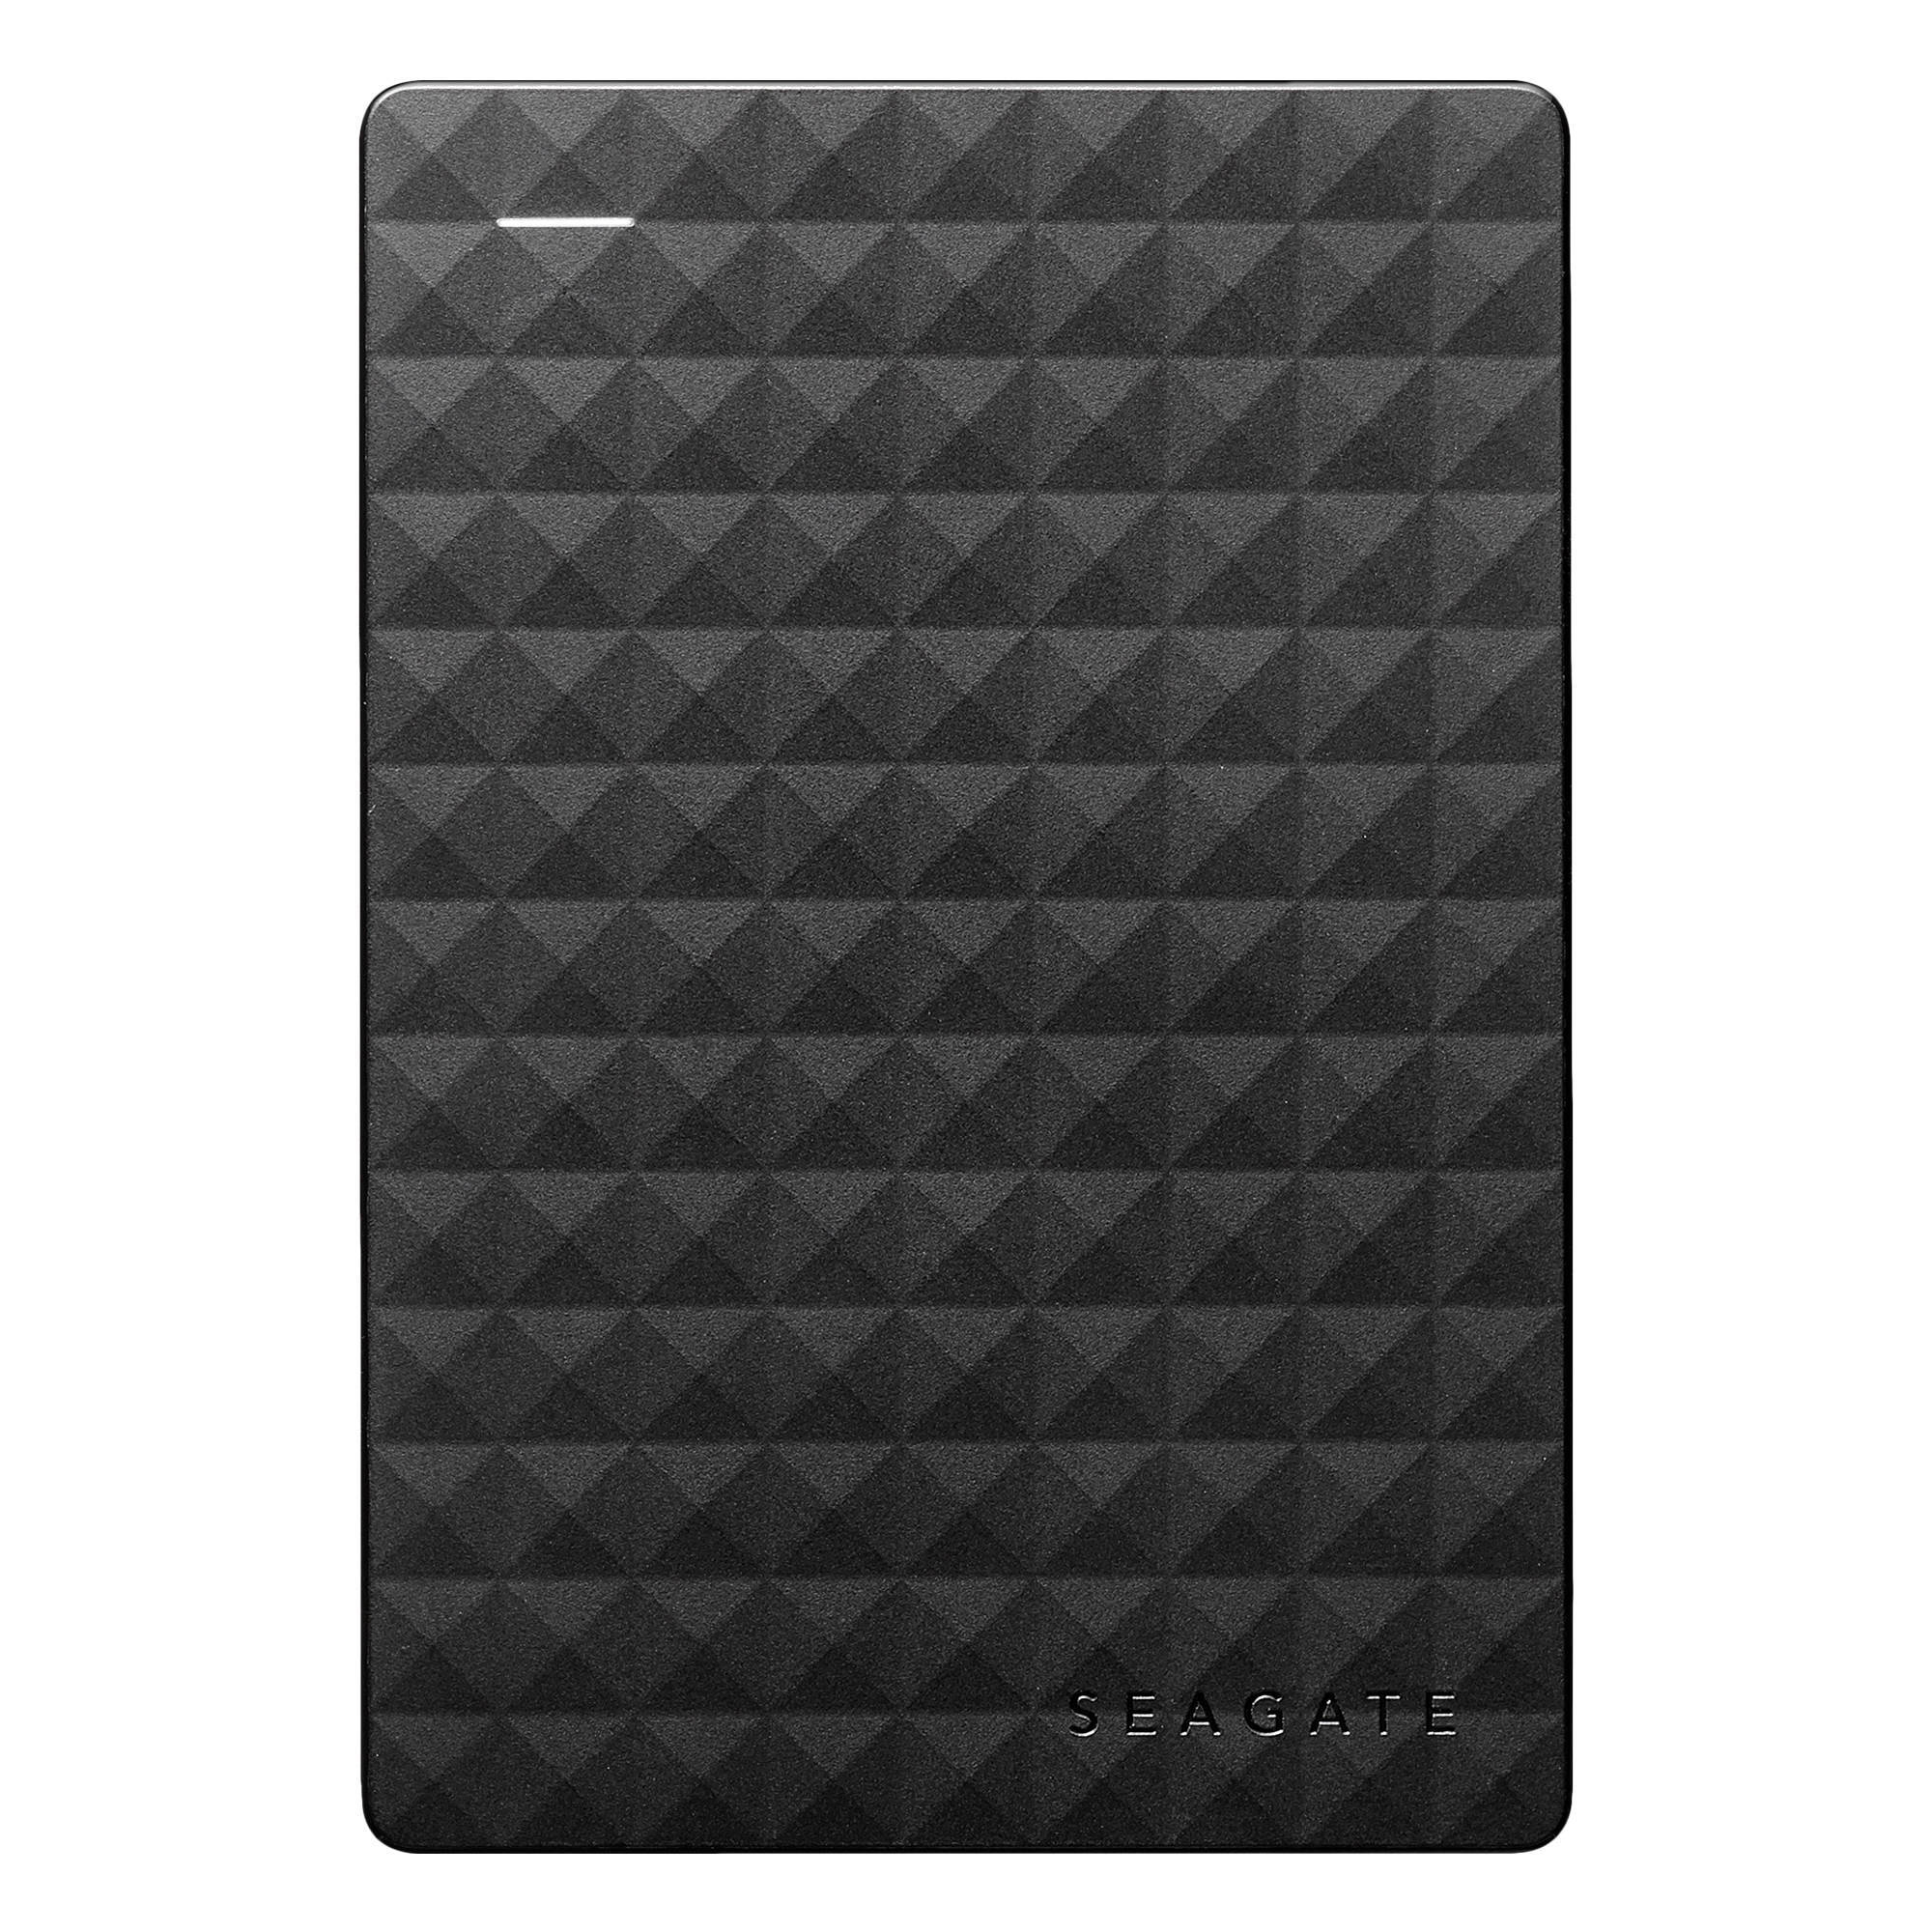 Ổ cứng HDD Seagate Expansion Portable 5TB STEA5000402